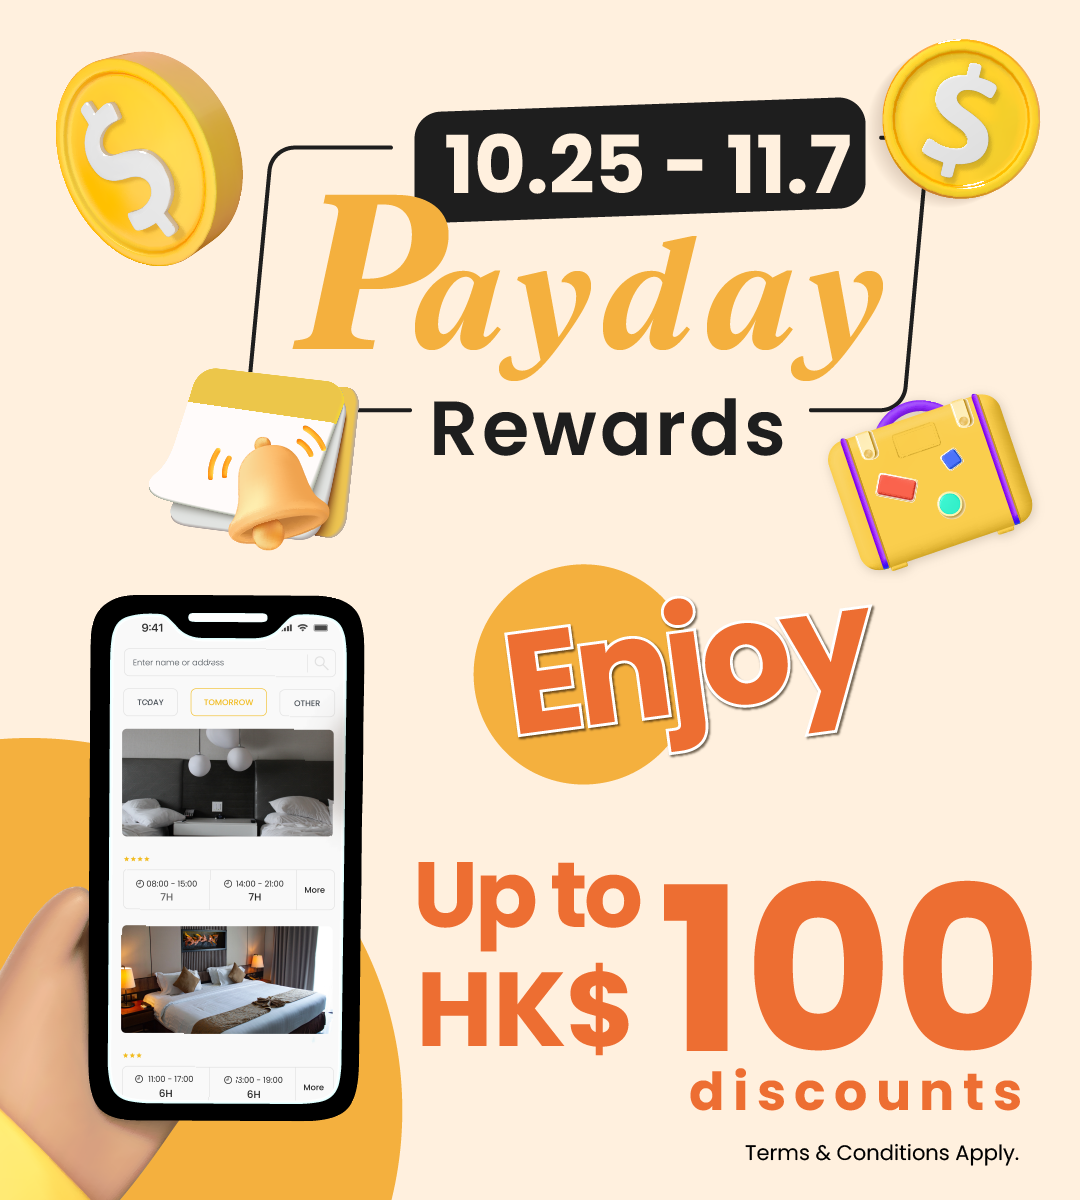 Pay Day Rewards: Celebrate your hard work with instant discount